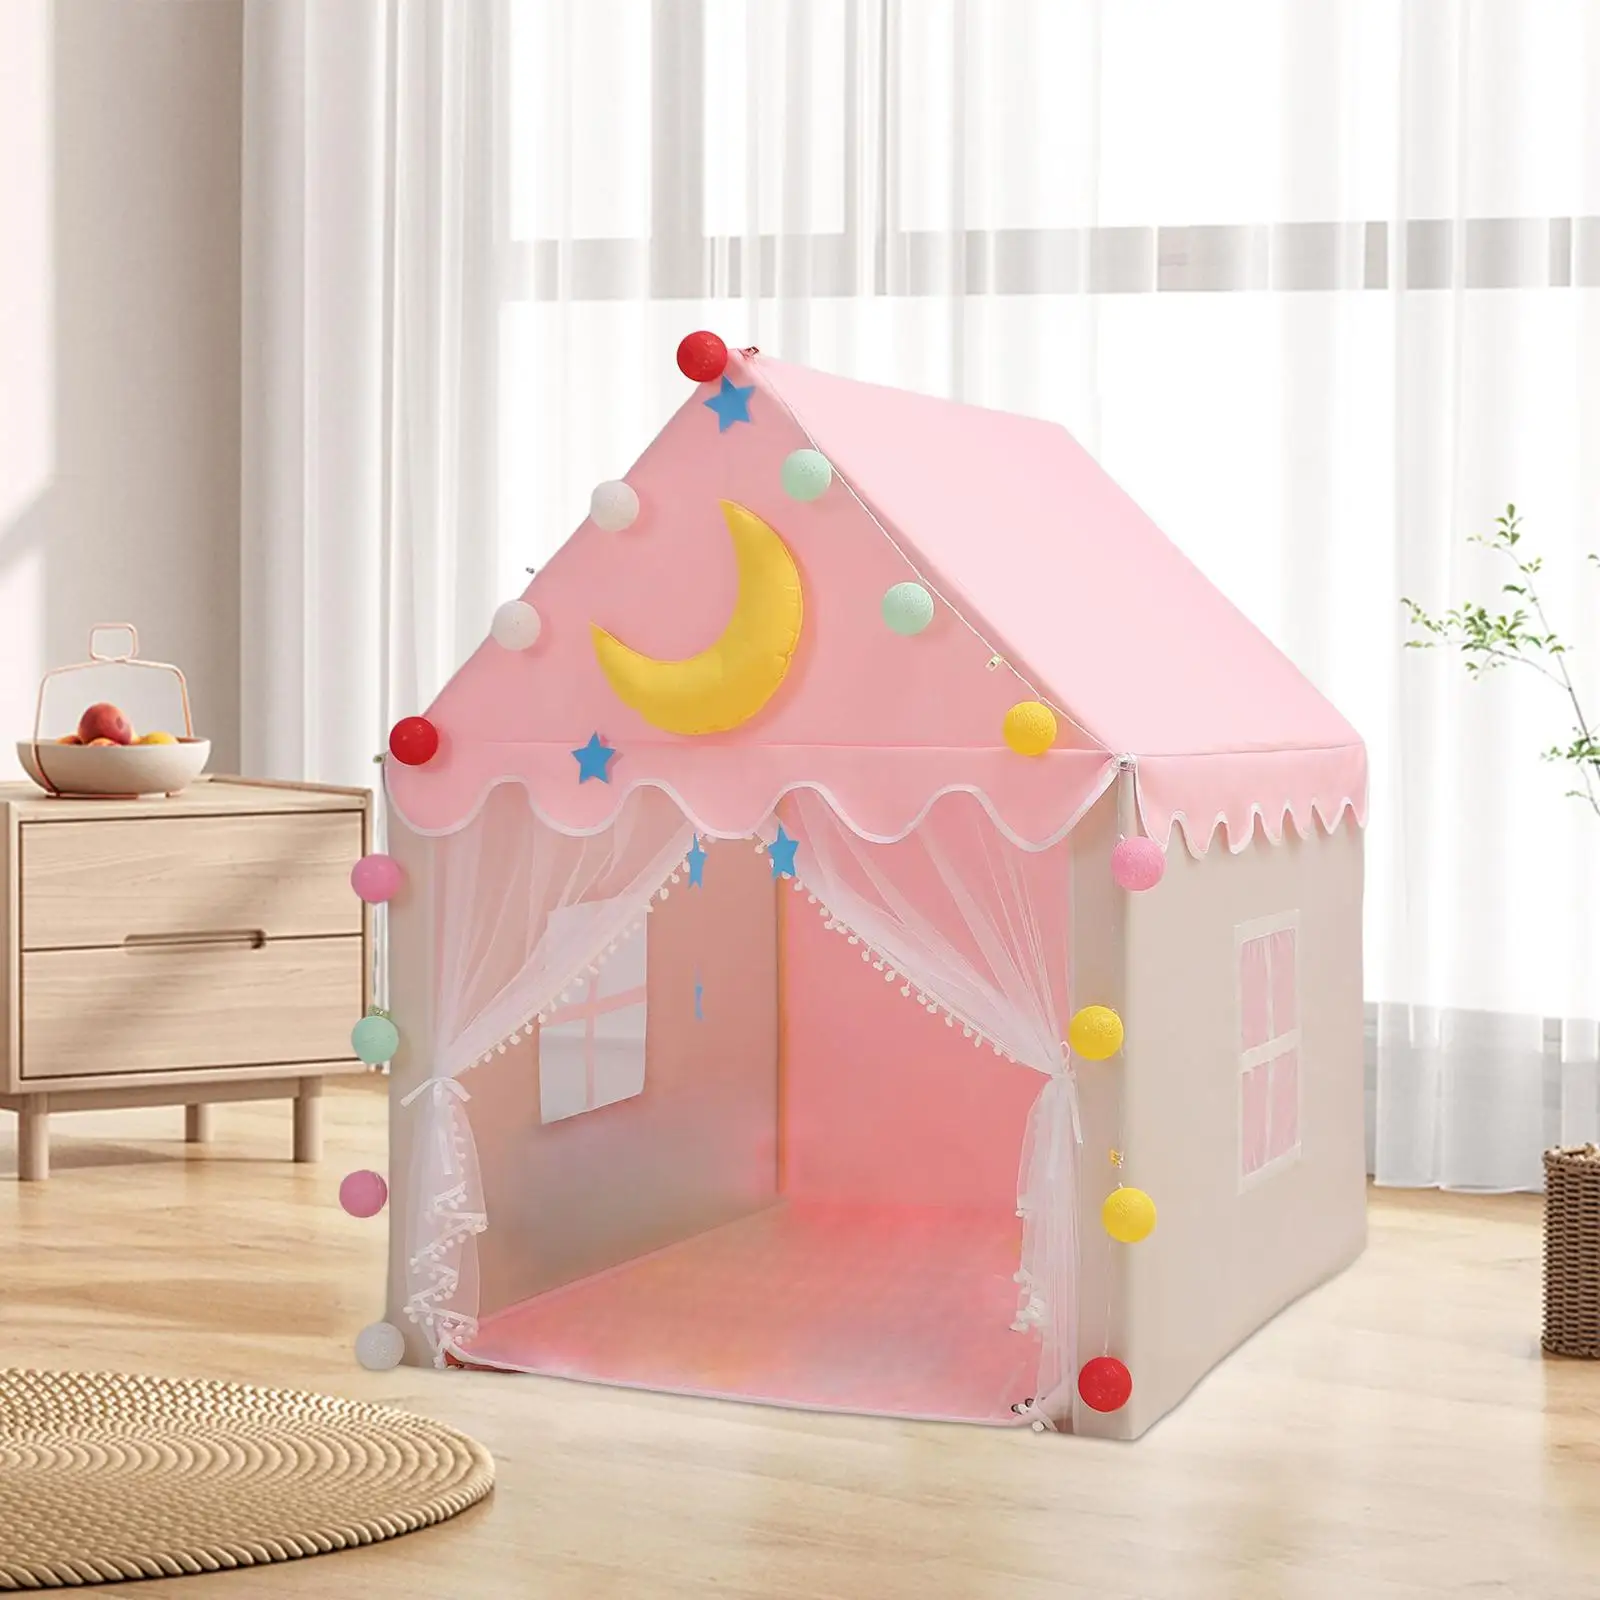 Indoor Outdoor Playhouse Camping Toy Foldable Baby Bedroom Furniture Play House for Toddlers Children Boys Holiday Gift